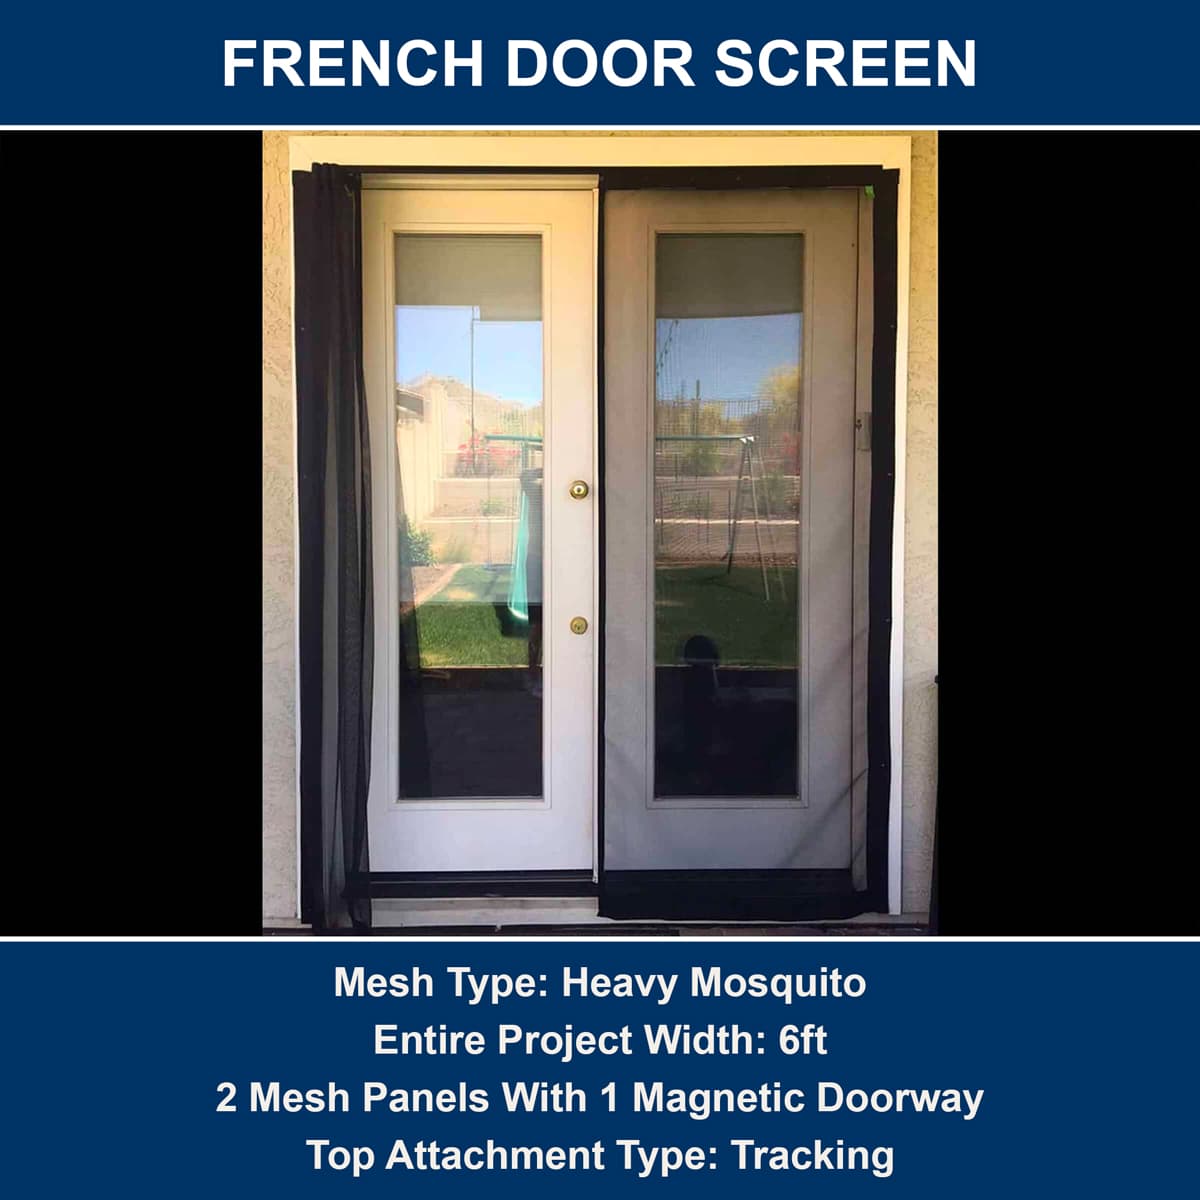 JBHURF Anti-Mosquito Curtain Anti-Mosquito/Insect/Fly/dust Screen Sliding Glass Door French Door Patio Door Magnetic Screen Door Screen Door Hands-Free pet Friendly 